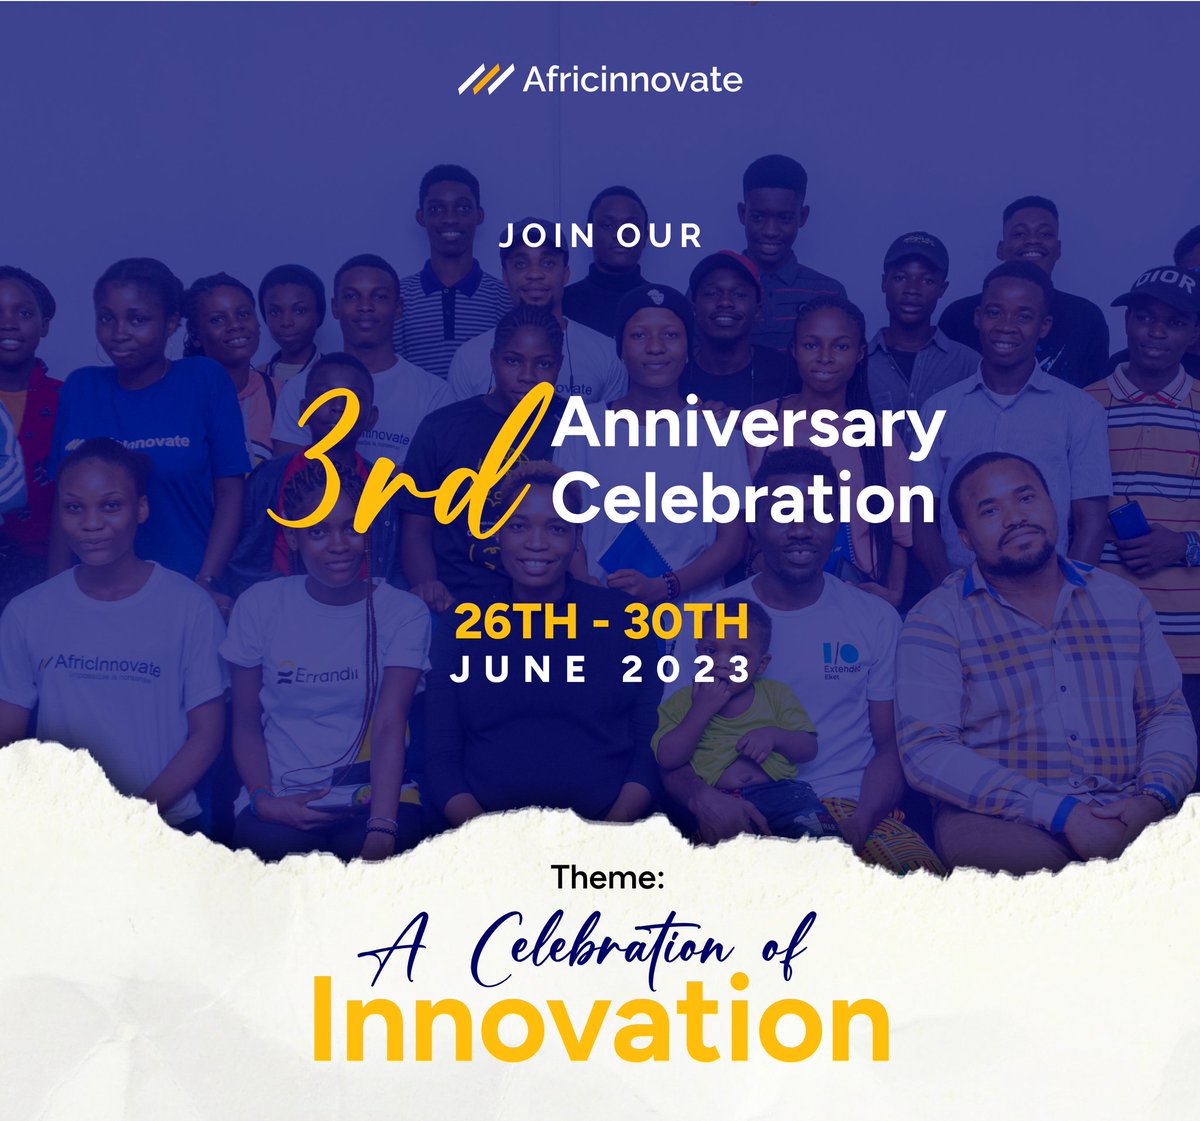 To all those who guessed right, it's our Anniversary! 🎉🎉 From June 26th to 30th, we're celebrating 3 years with the theme A Celebration of Innovation. You are cordially invited to celebrate with us. Let's make this milestone unforgettable together!